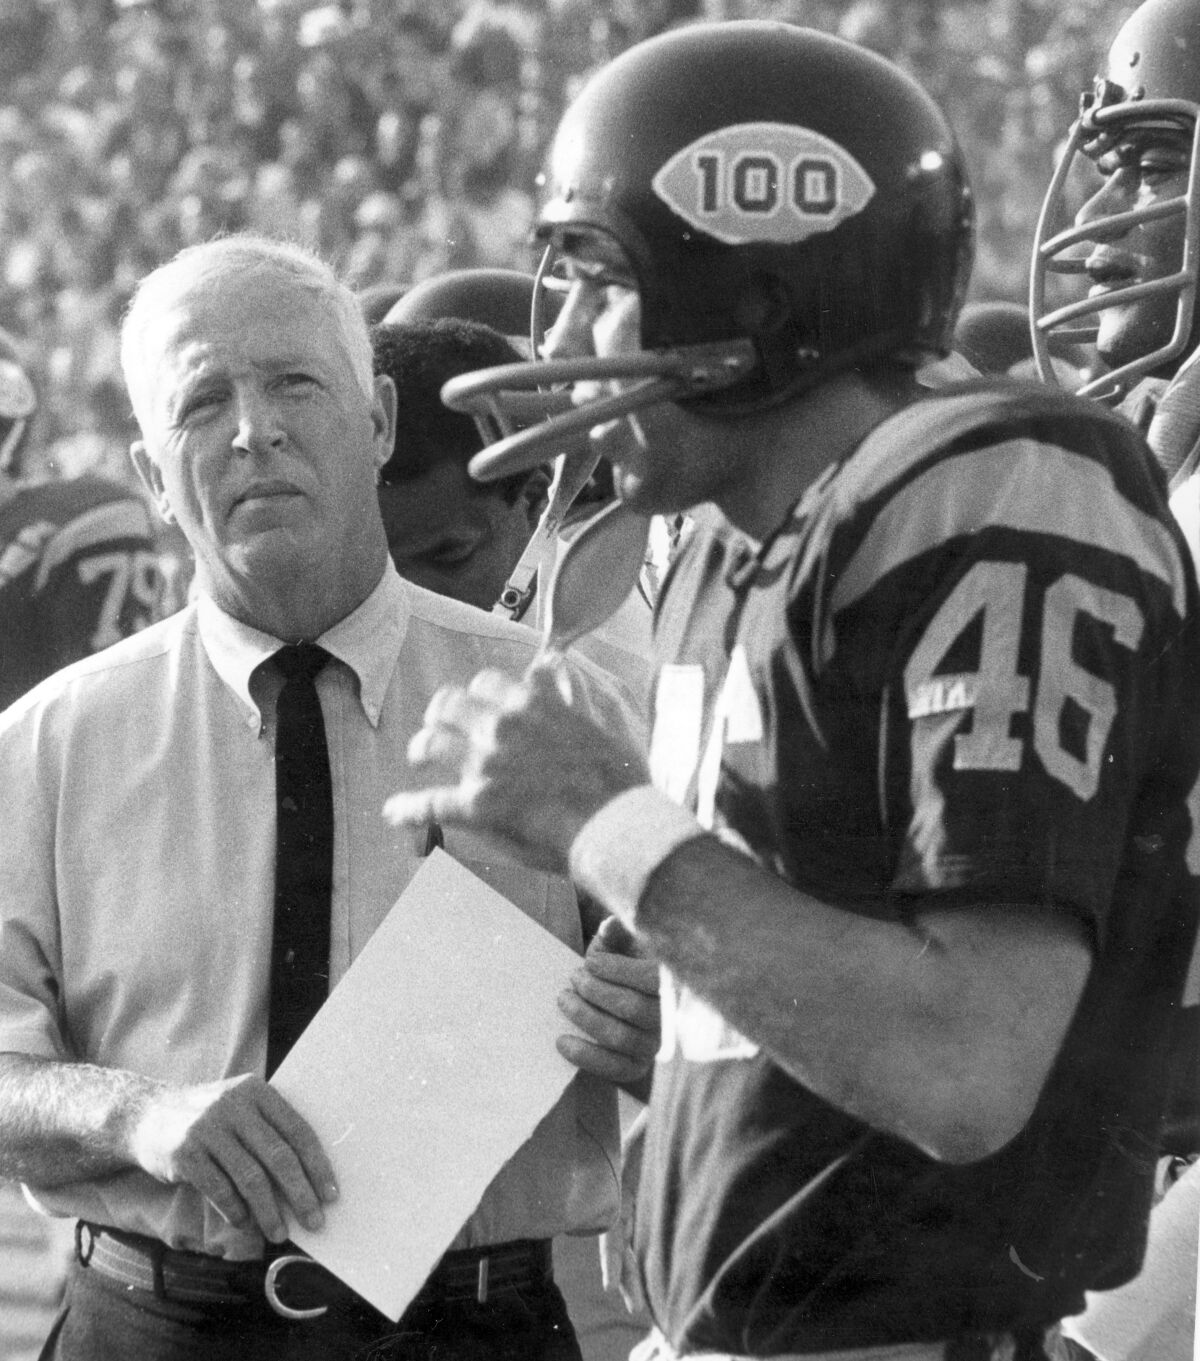 USC coach John McKay talks with defensive back Gerry Shaw (46) during 1969 game against UCLA.